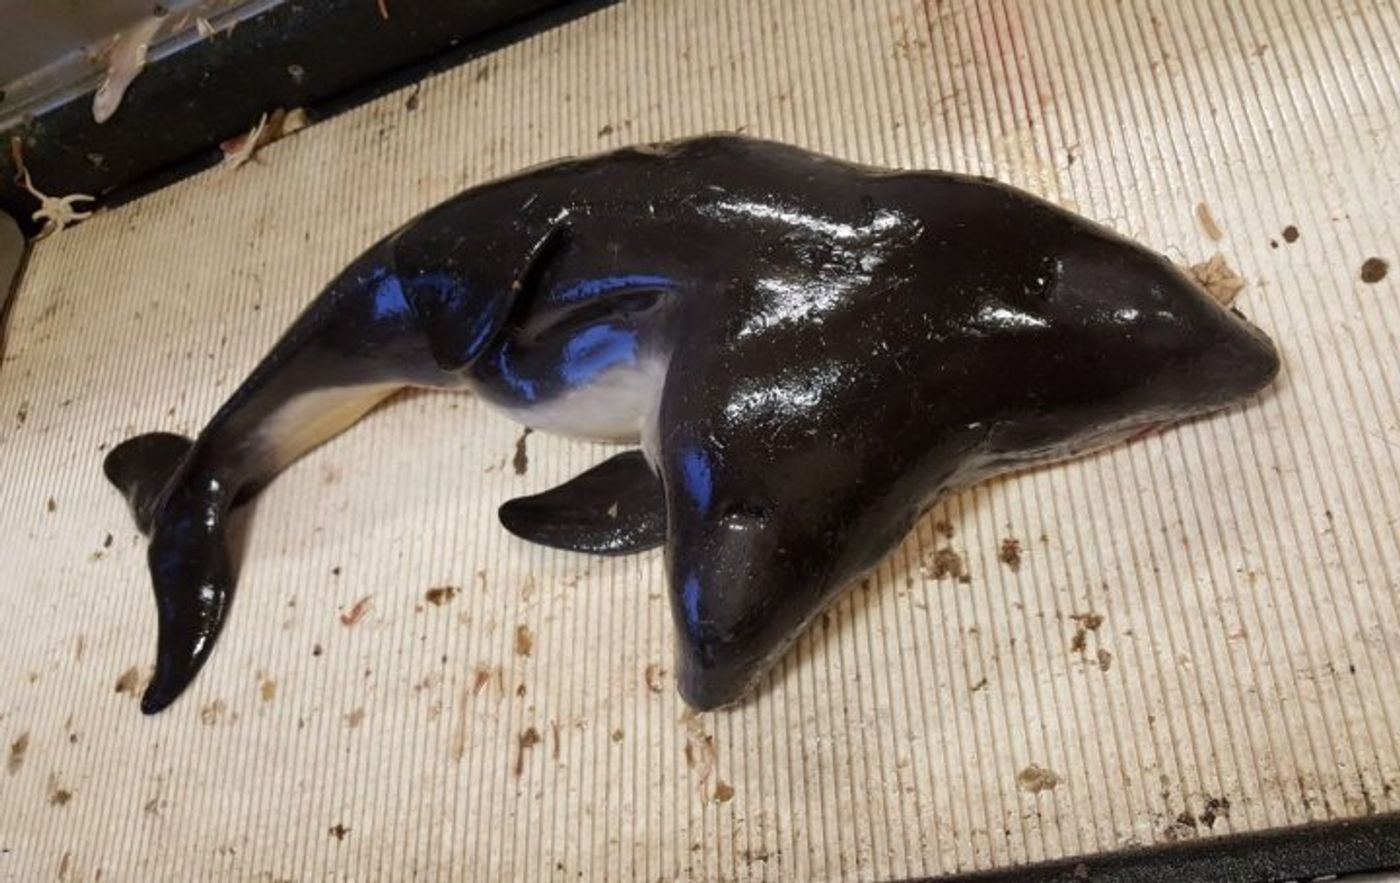 The two-headed porpoise is the first of its kind ever found.